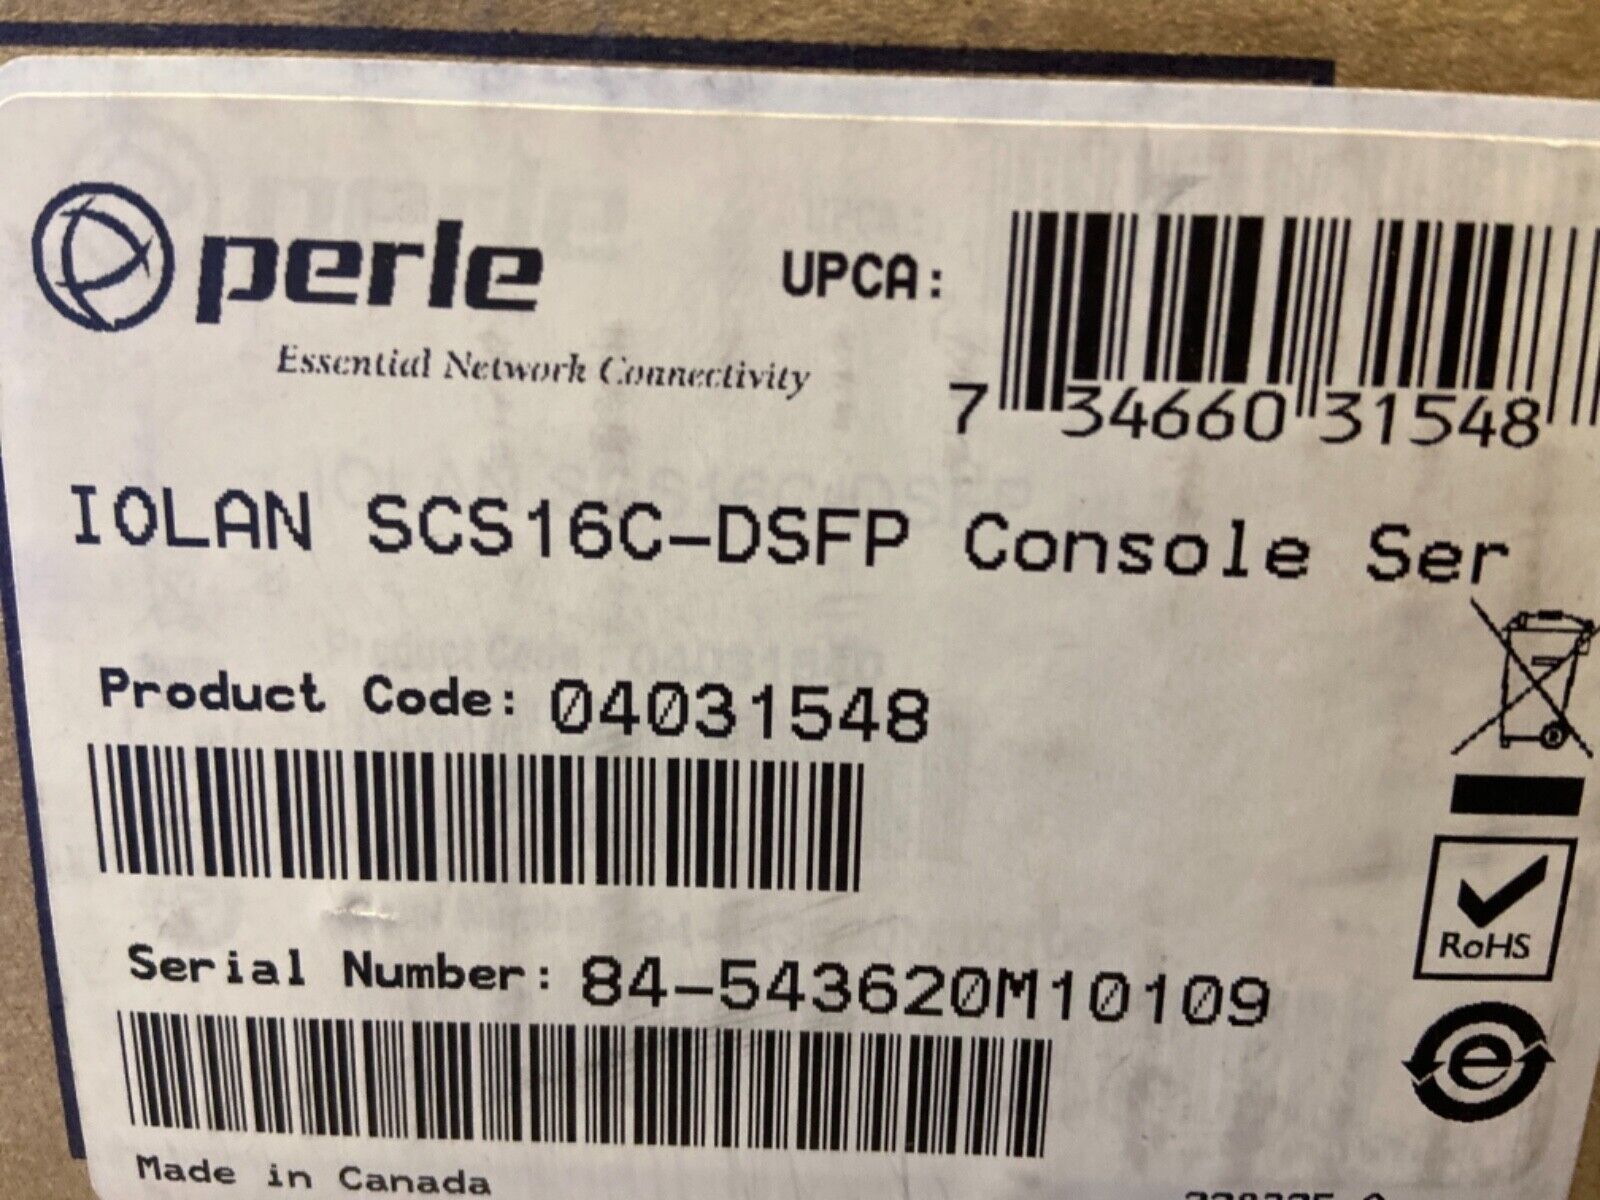 NEW PERLE SYSTEMS IOLAN SCS16C-DSFP CONSOLE SVR 04031548